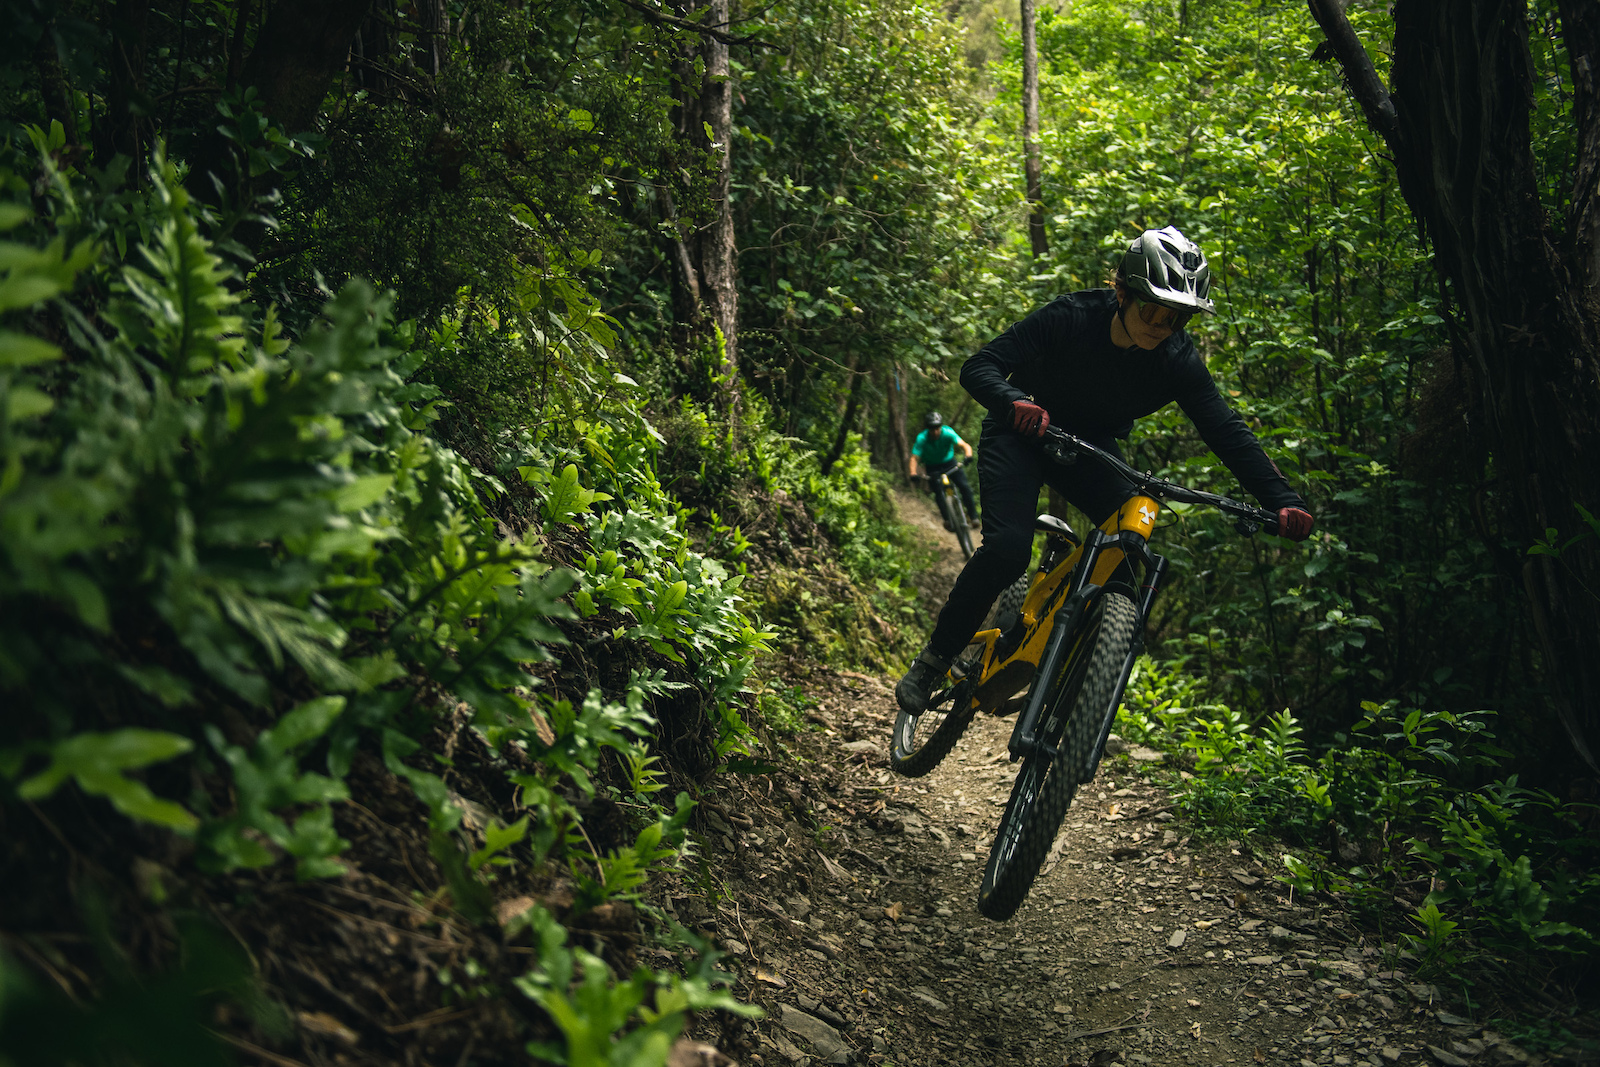 Boosting through the vibrant greens on some flat out singletrack.